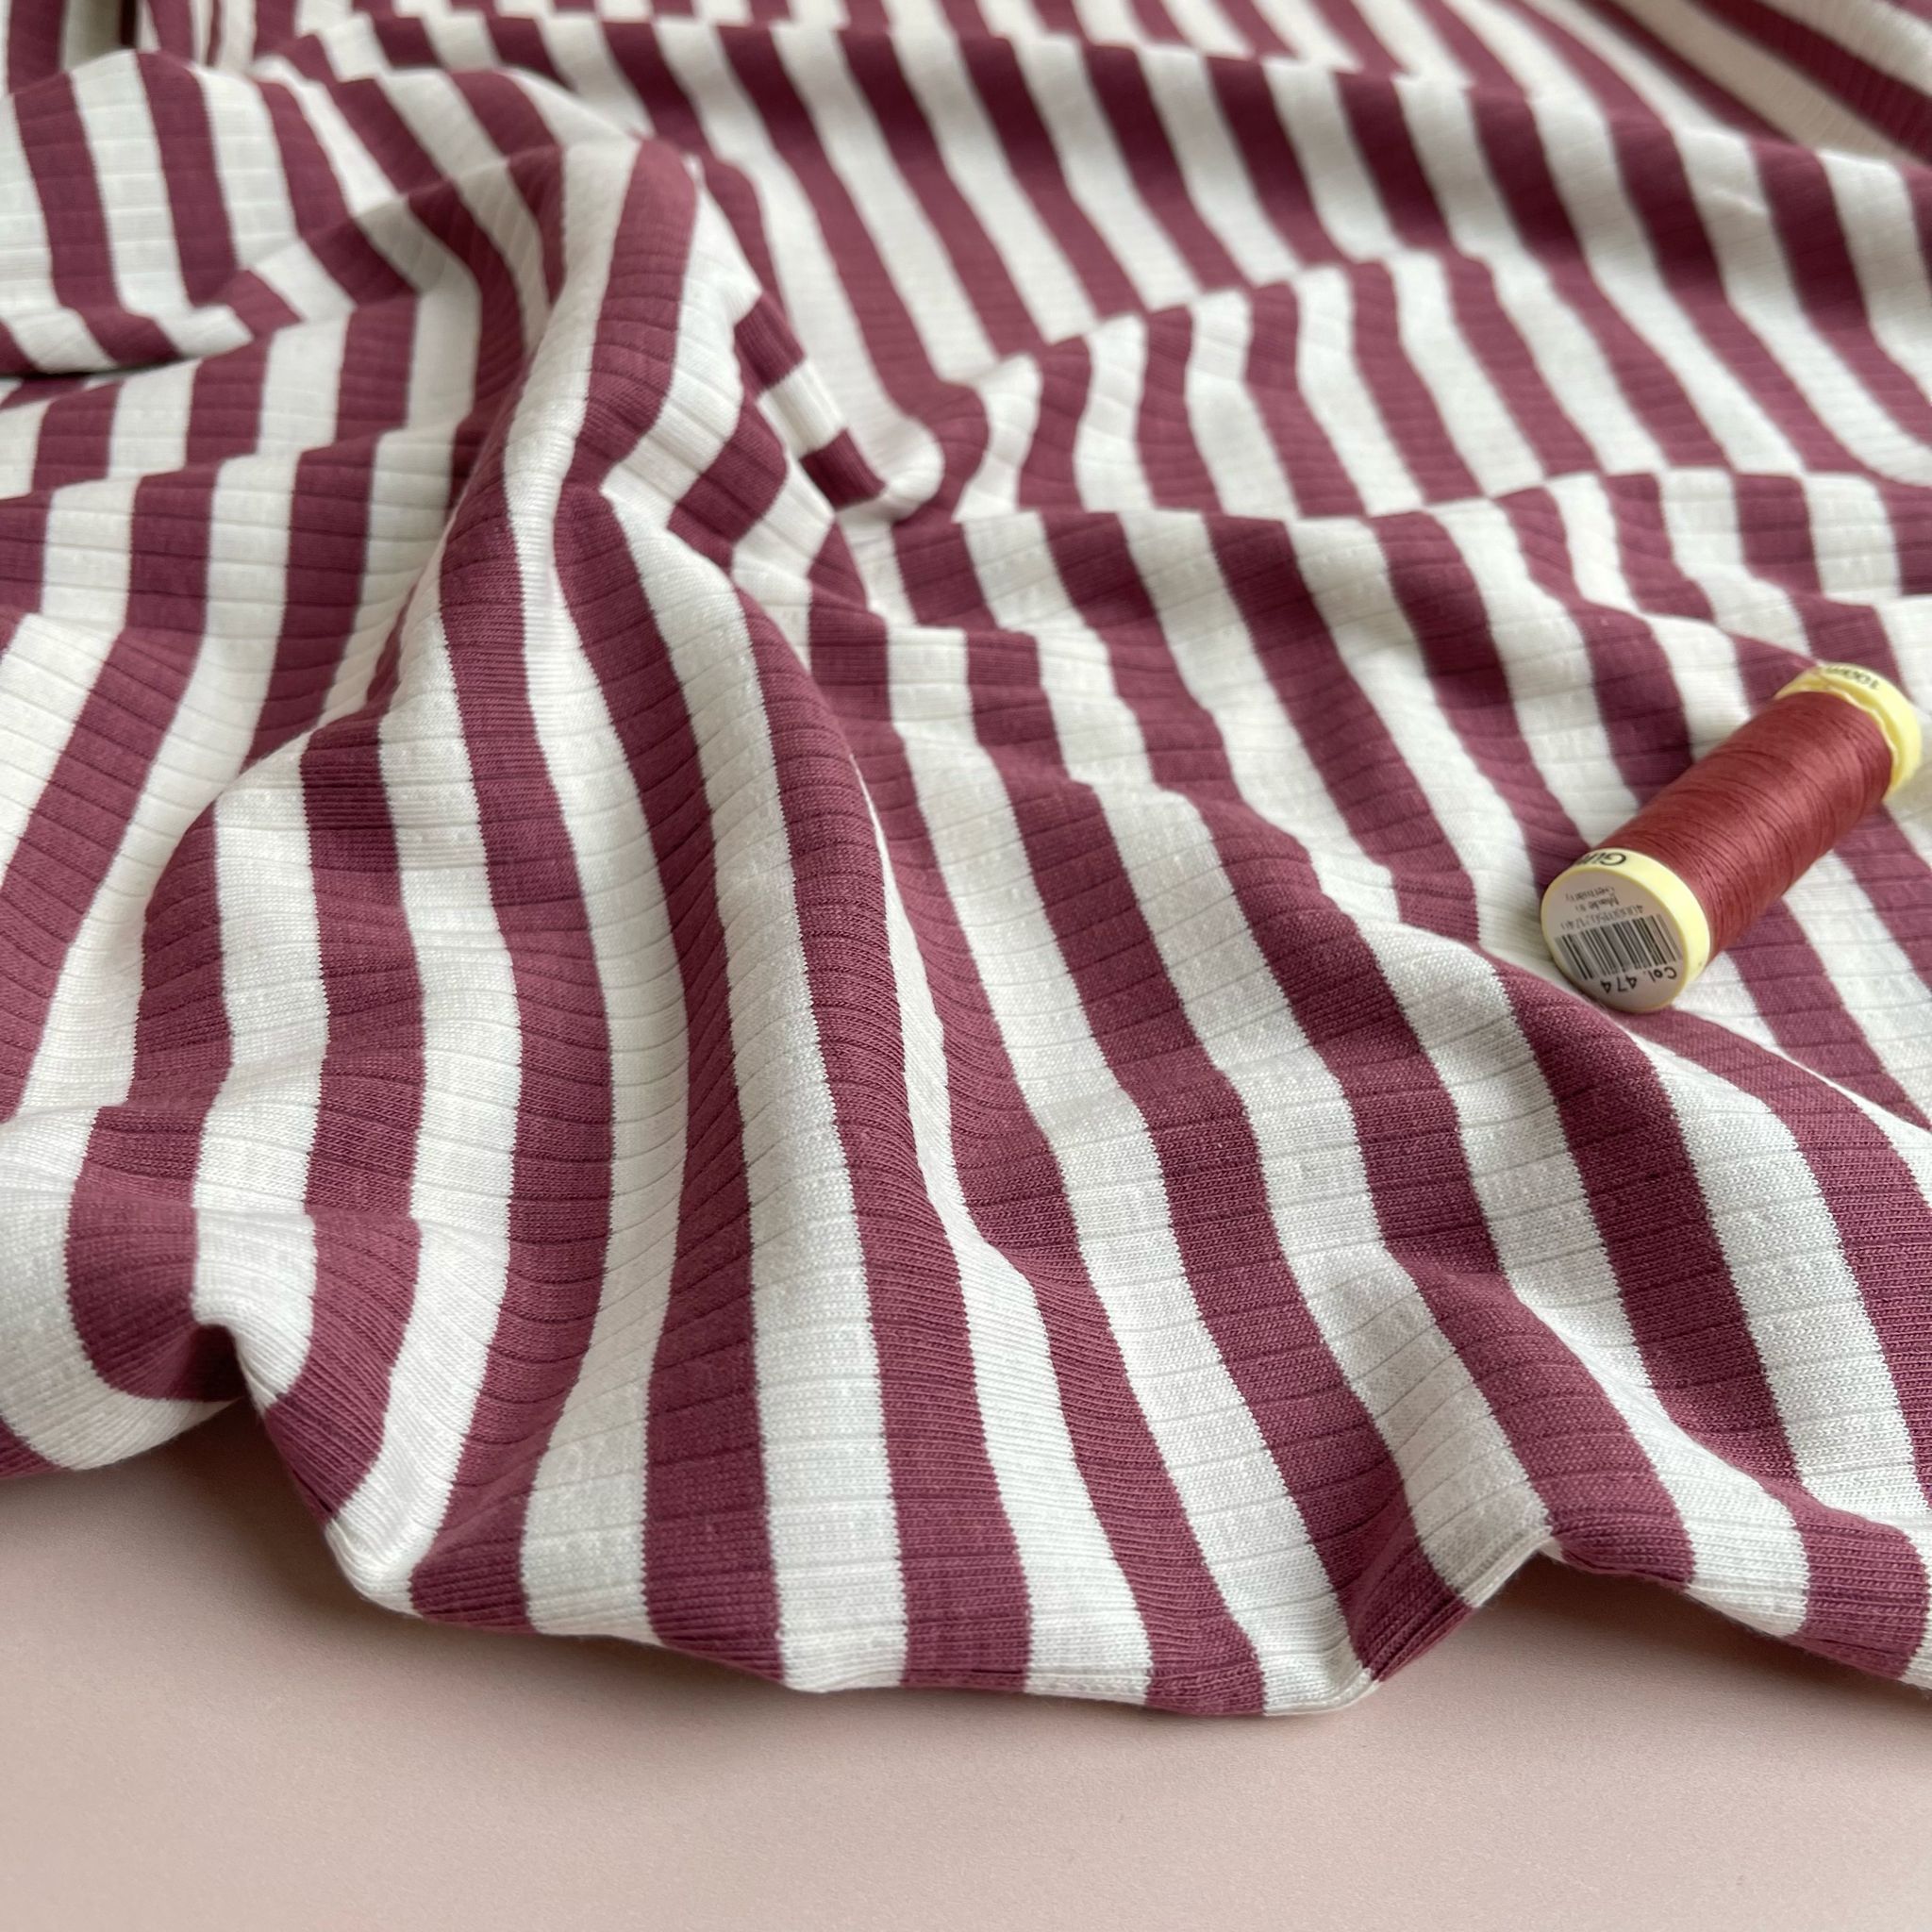 Yarn Dyed Striped Cotton Ribbed Jersey in Dark Mauve and White